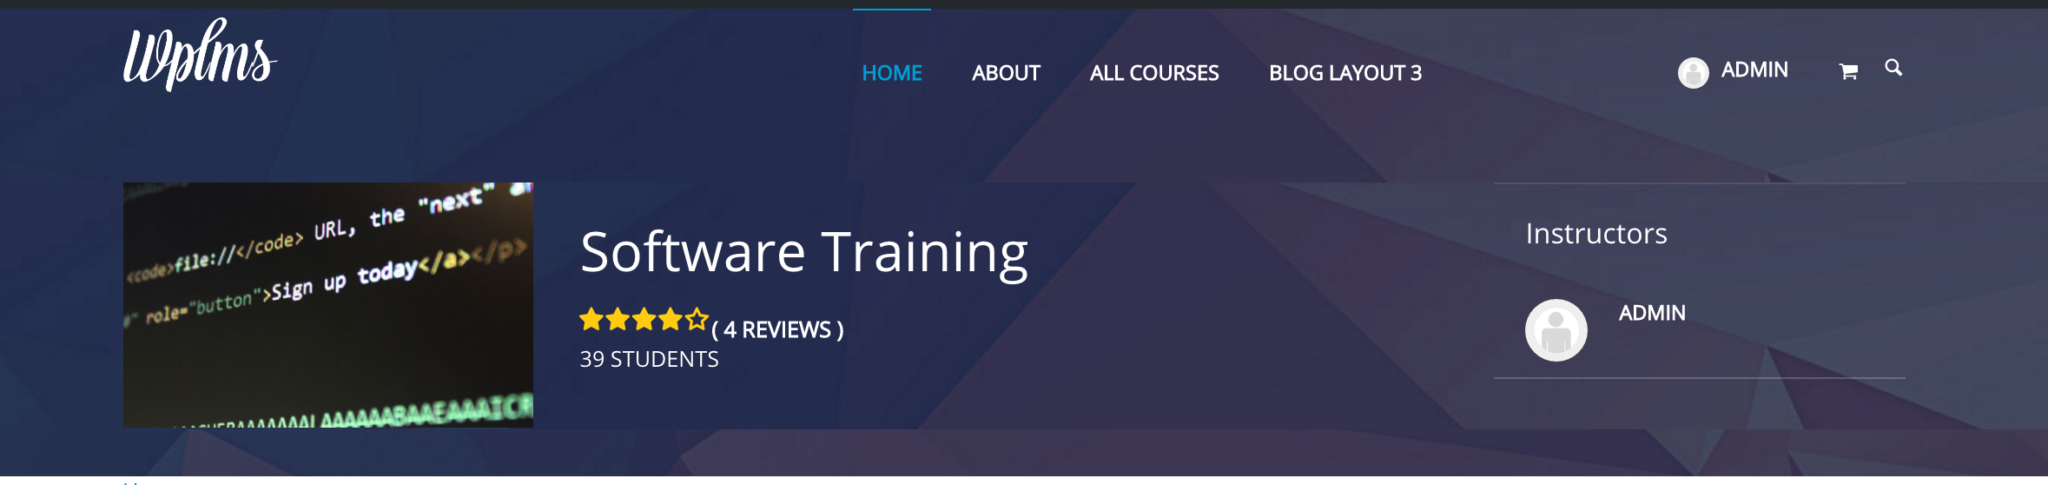 Header Showing Course